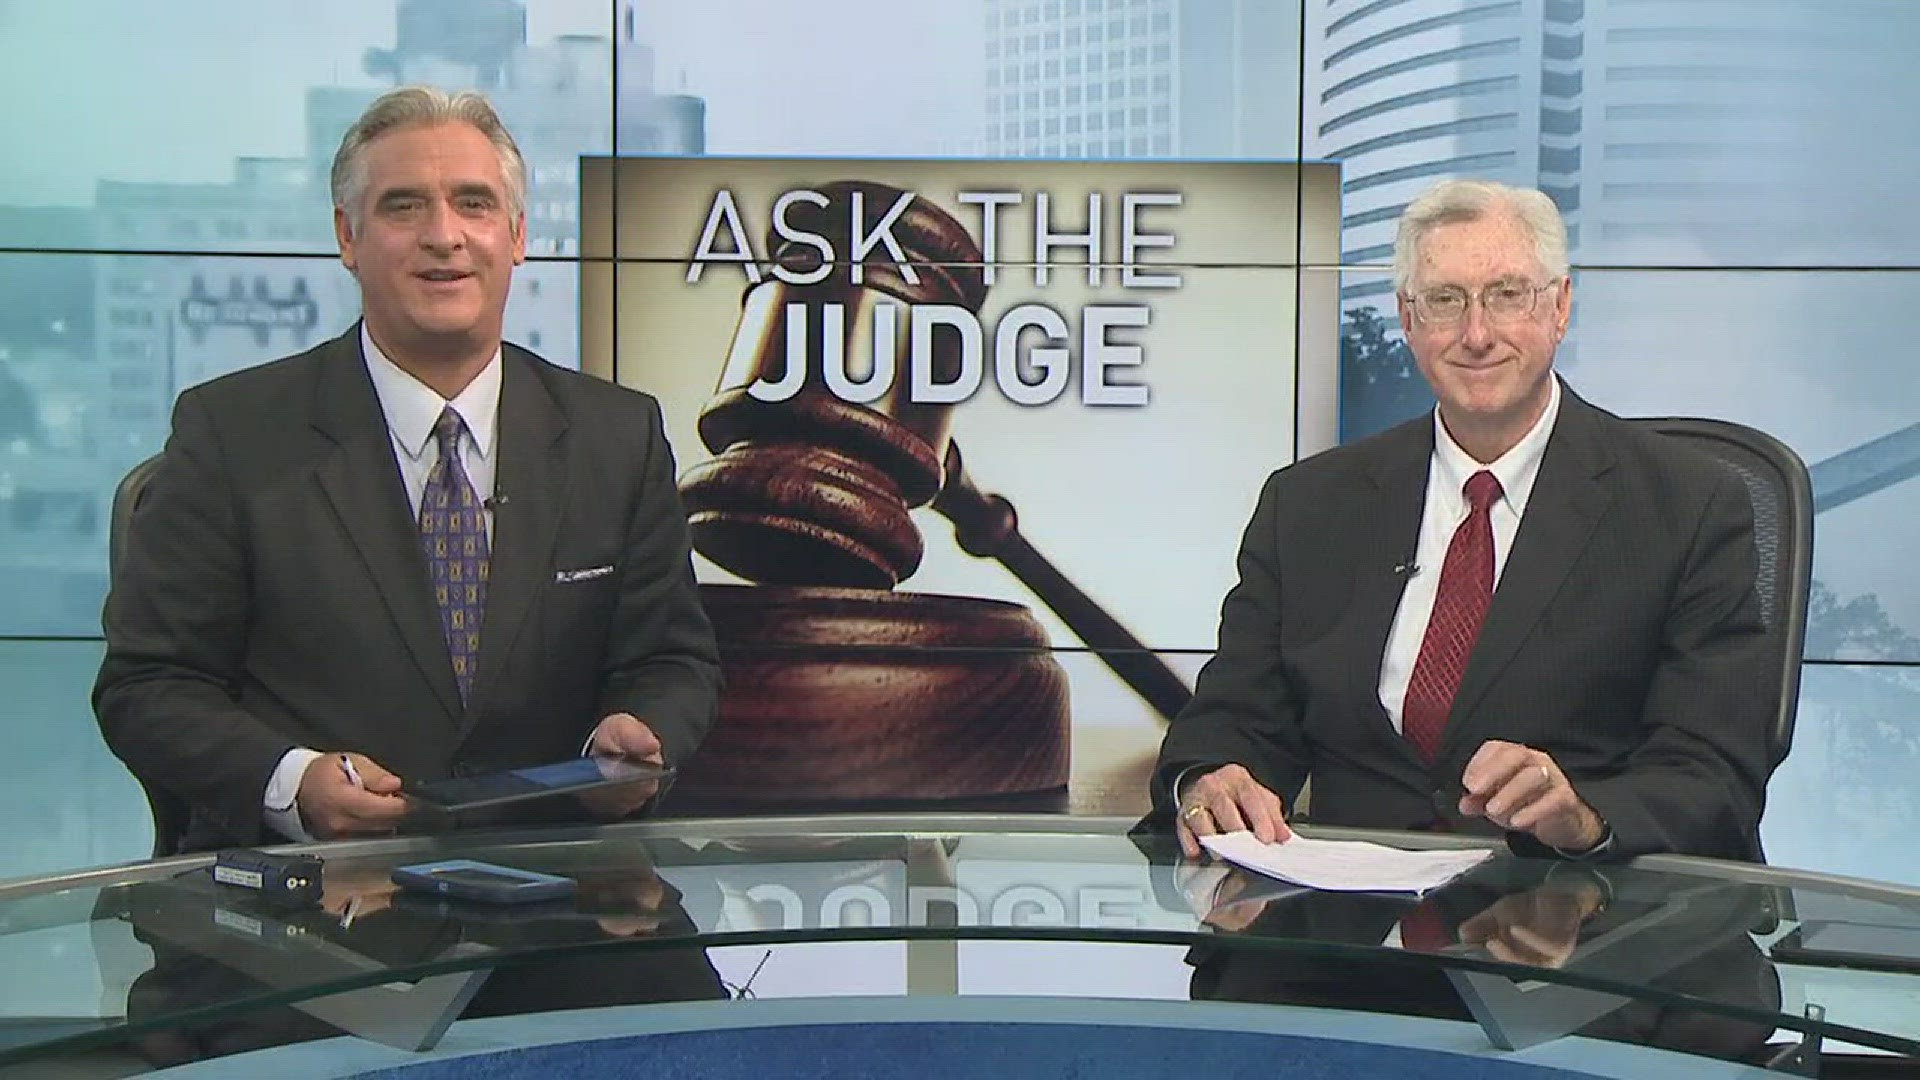 From leasing questions, roommate questions, and more, Judge Larry Thorne has your answers. You can send Ask the Judge questions to 12news@12newsnow.com